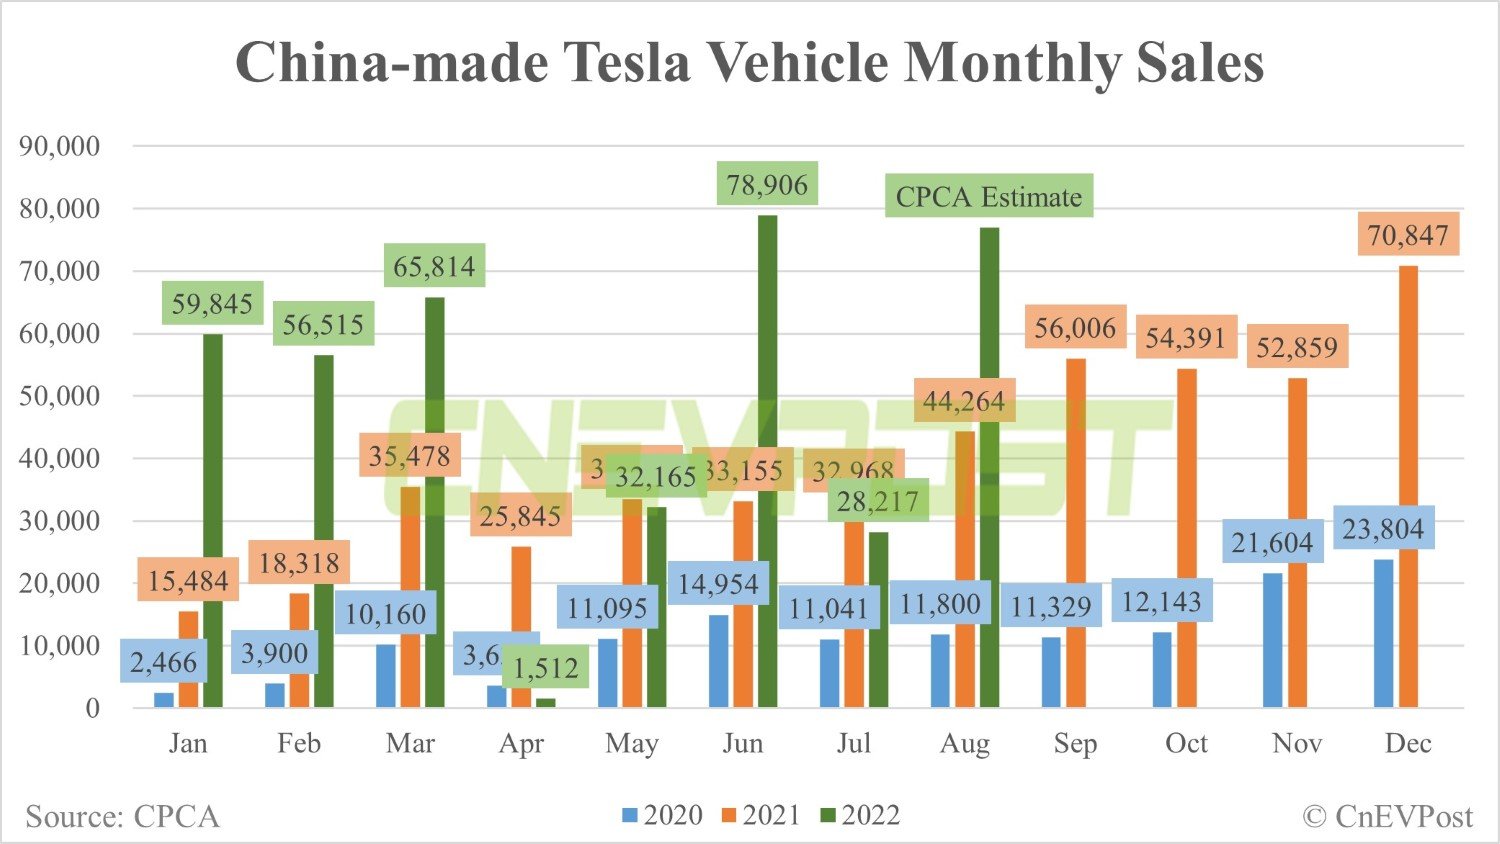 Tesla's China-made vehicle sales expected to be 77,000 units in Aug, CPCA official says-CnEVPost